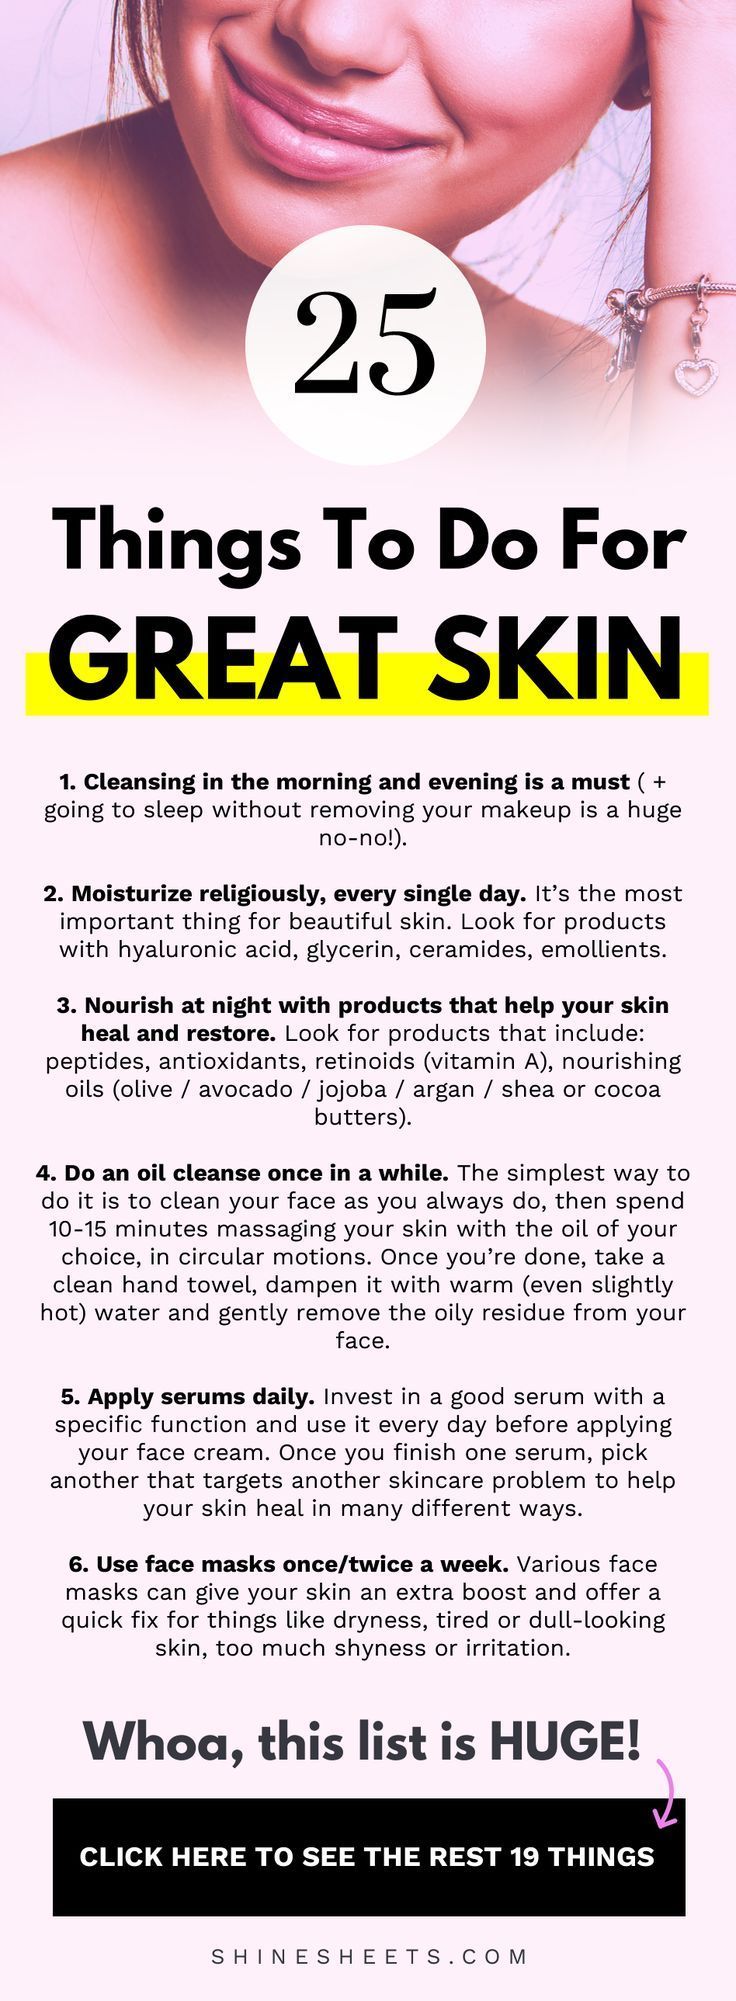 25 Things To Do For Stunning Skin | ShineSheets - 25 Things To Do For Stunning Skin | ShineSheets -   skincare beauty Secrets